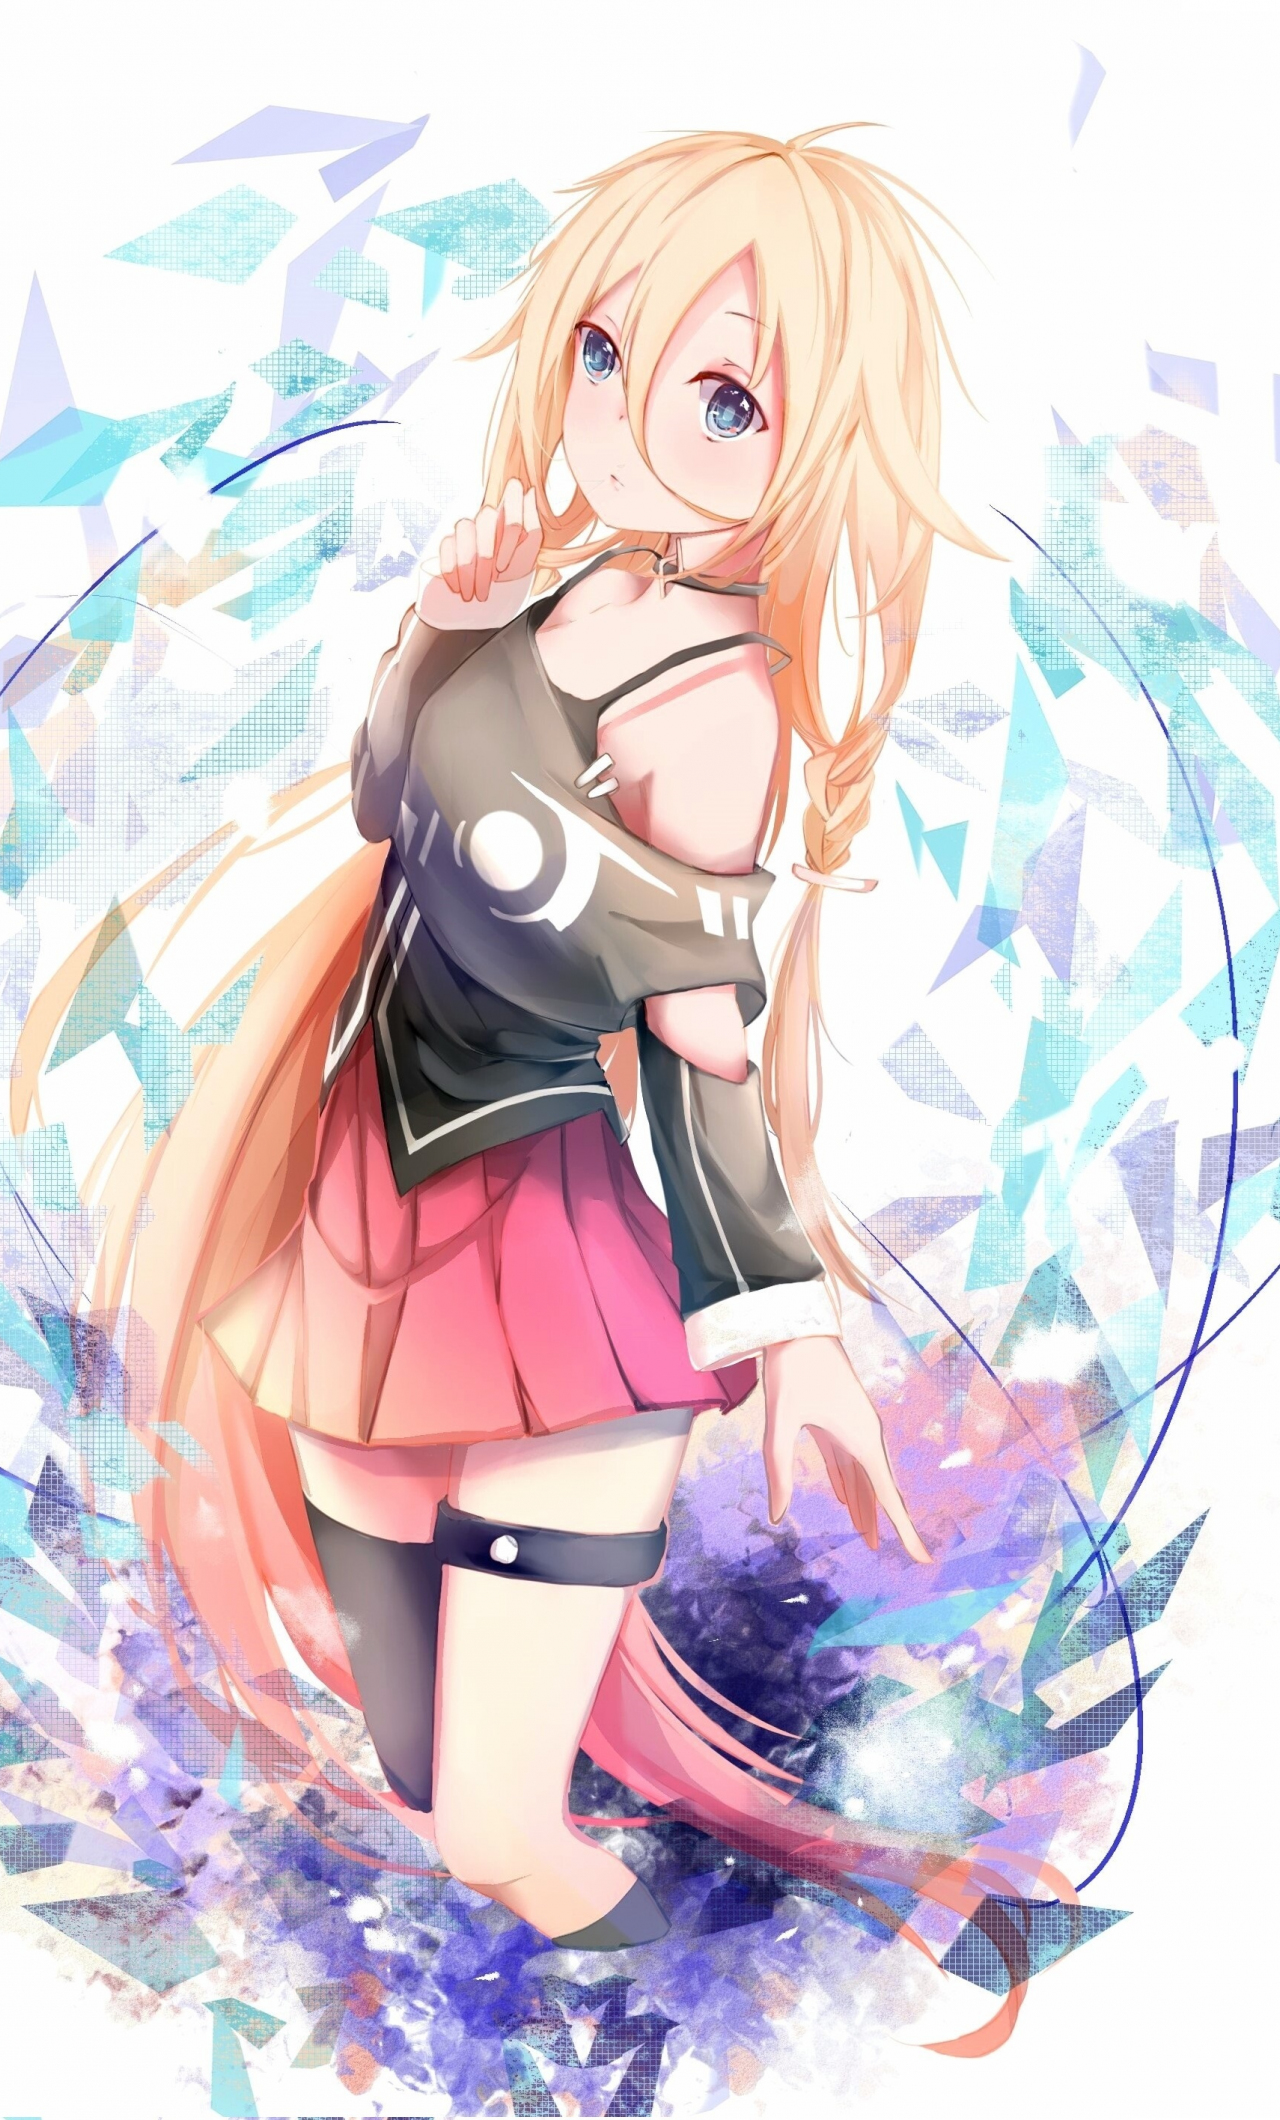 Download 1280x21 Wallpaper Blonde Ia Long Hair Anime Girl Vocaloid Iphone 6 Plus 1280x21 Hd Image Background 4087